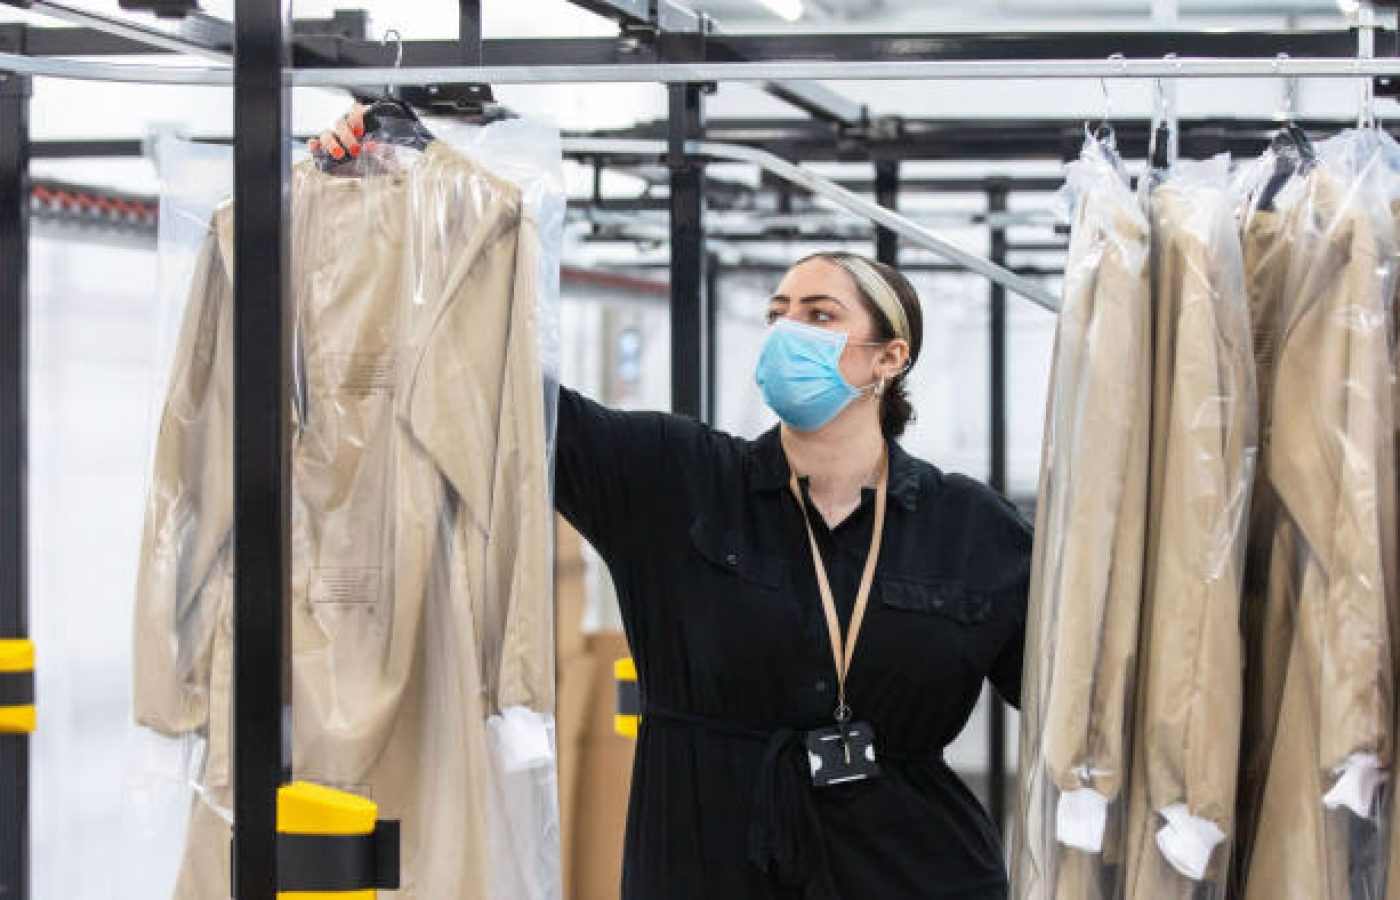 Burberry is making protective gowns for workers in Britain's National Health Service © Bloomberg